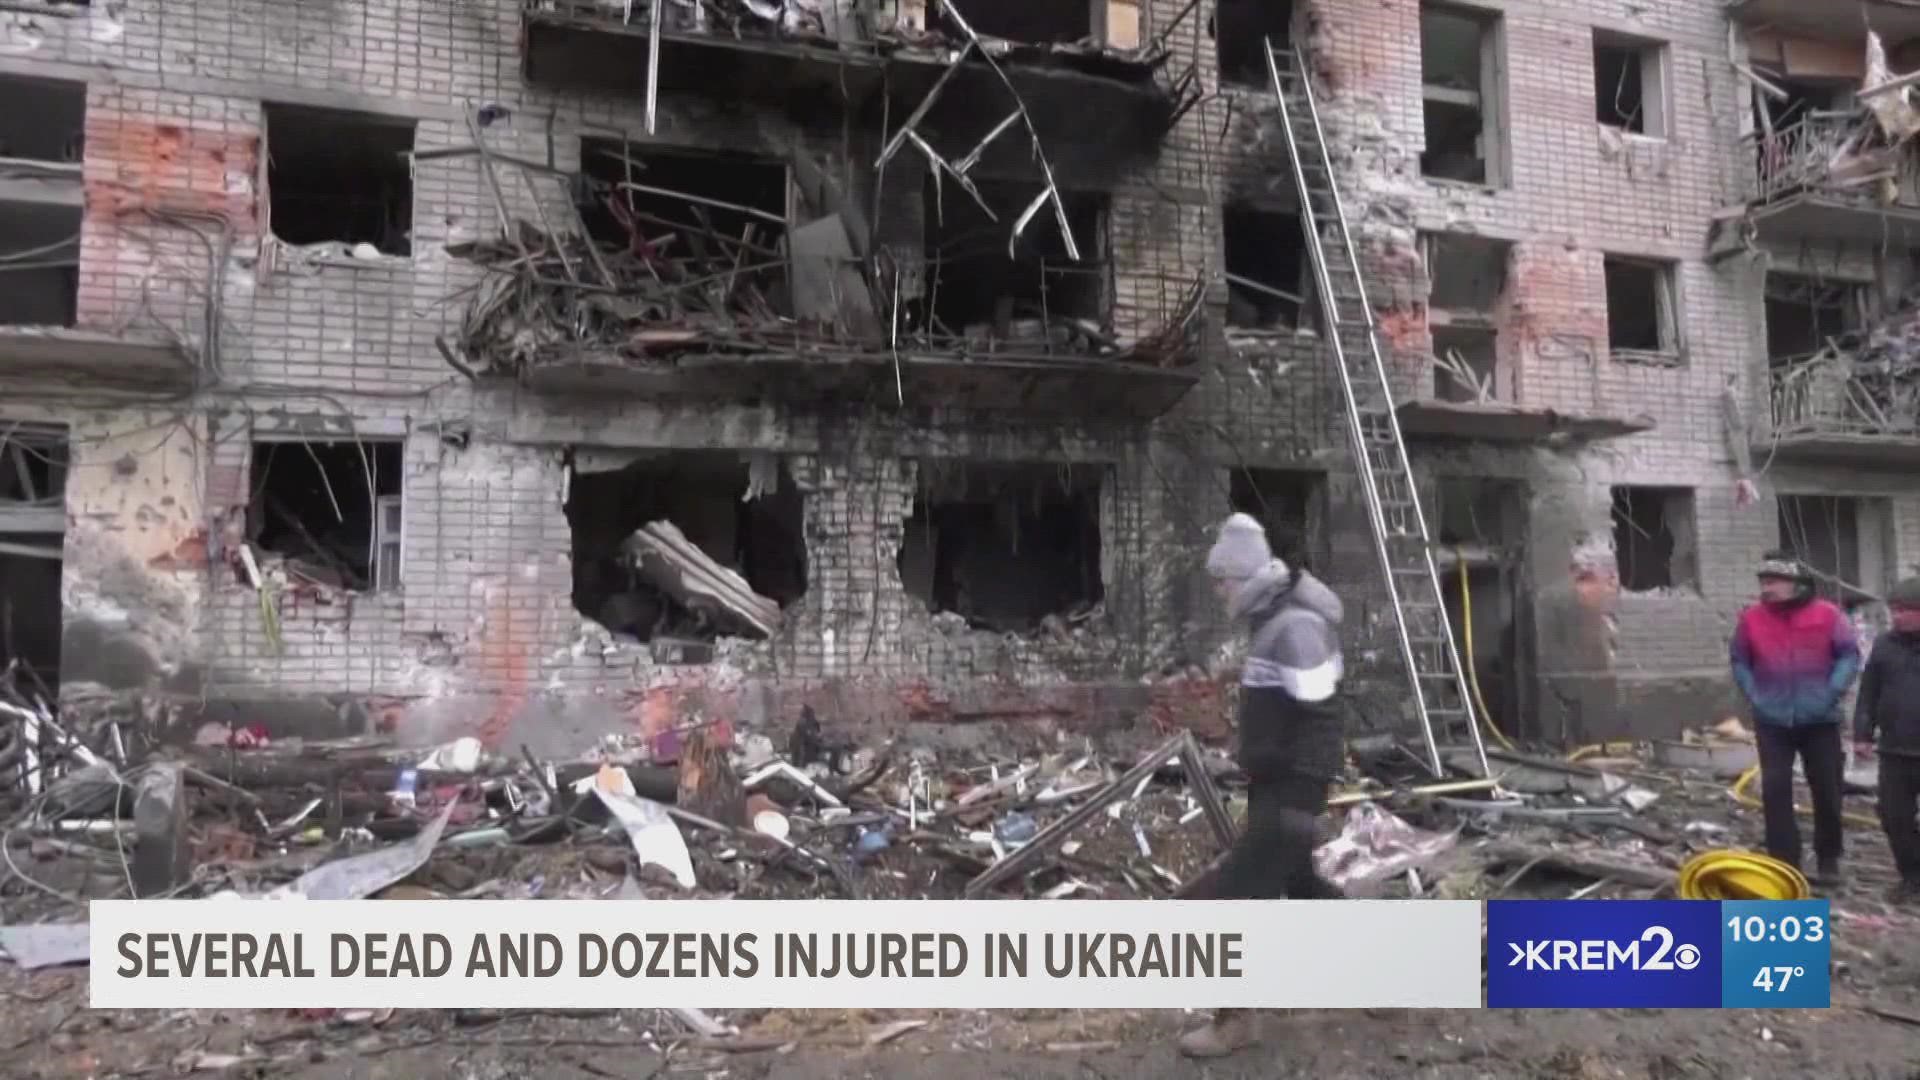 In the past few hours, the Ukrainian Interior Ministry said that at least 10 people have died and dozens were hurt after a Russian missile slammed into a building.